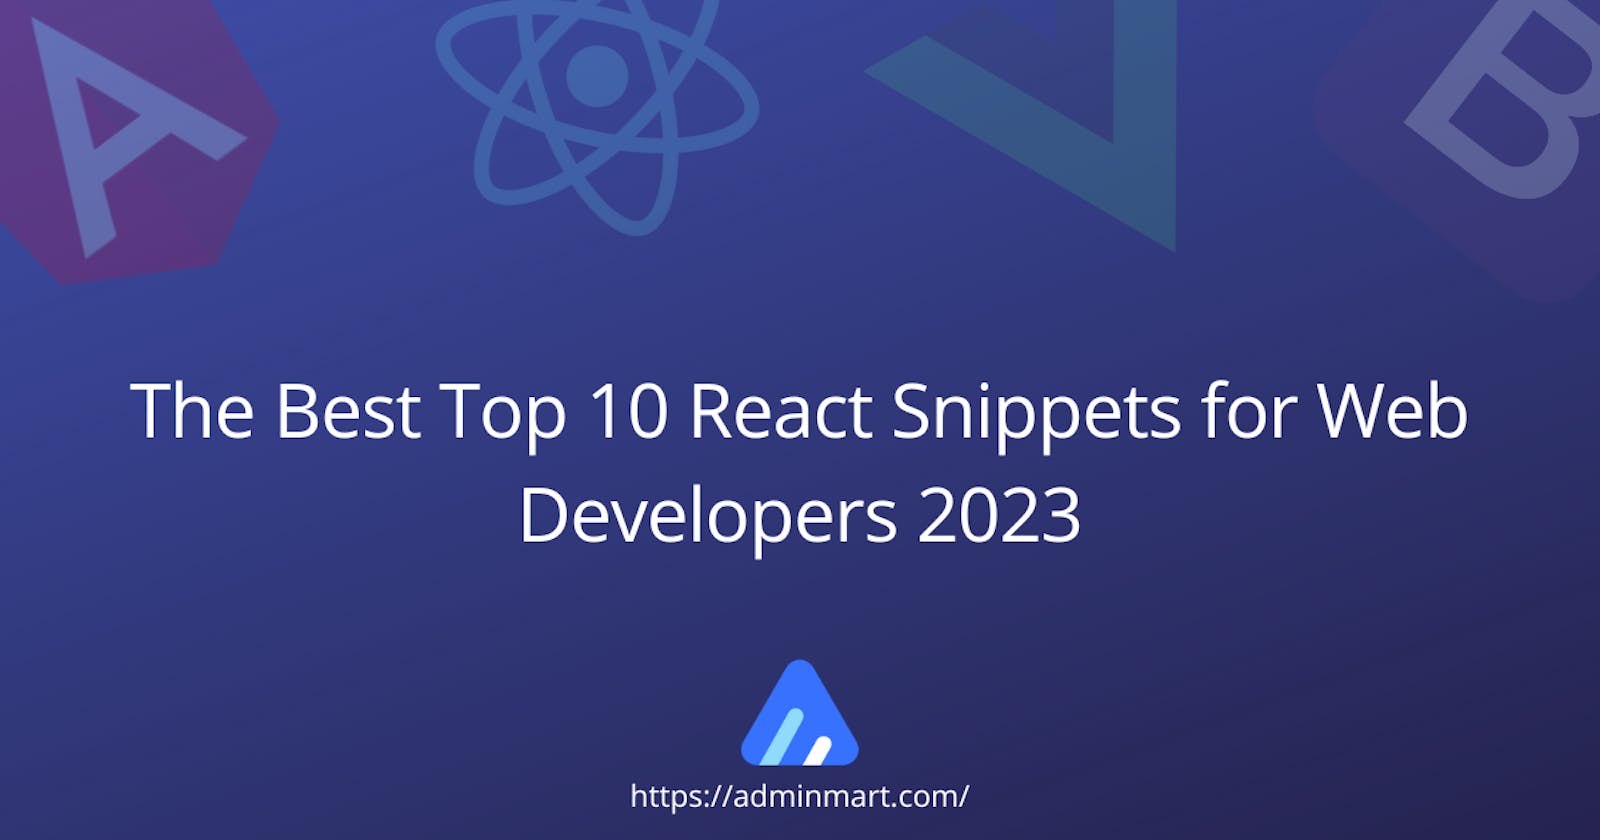 The Best Top 10 React Snippets for Web Developers 2023